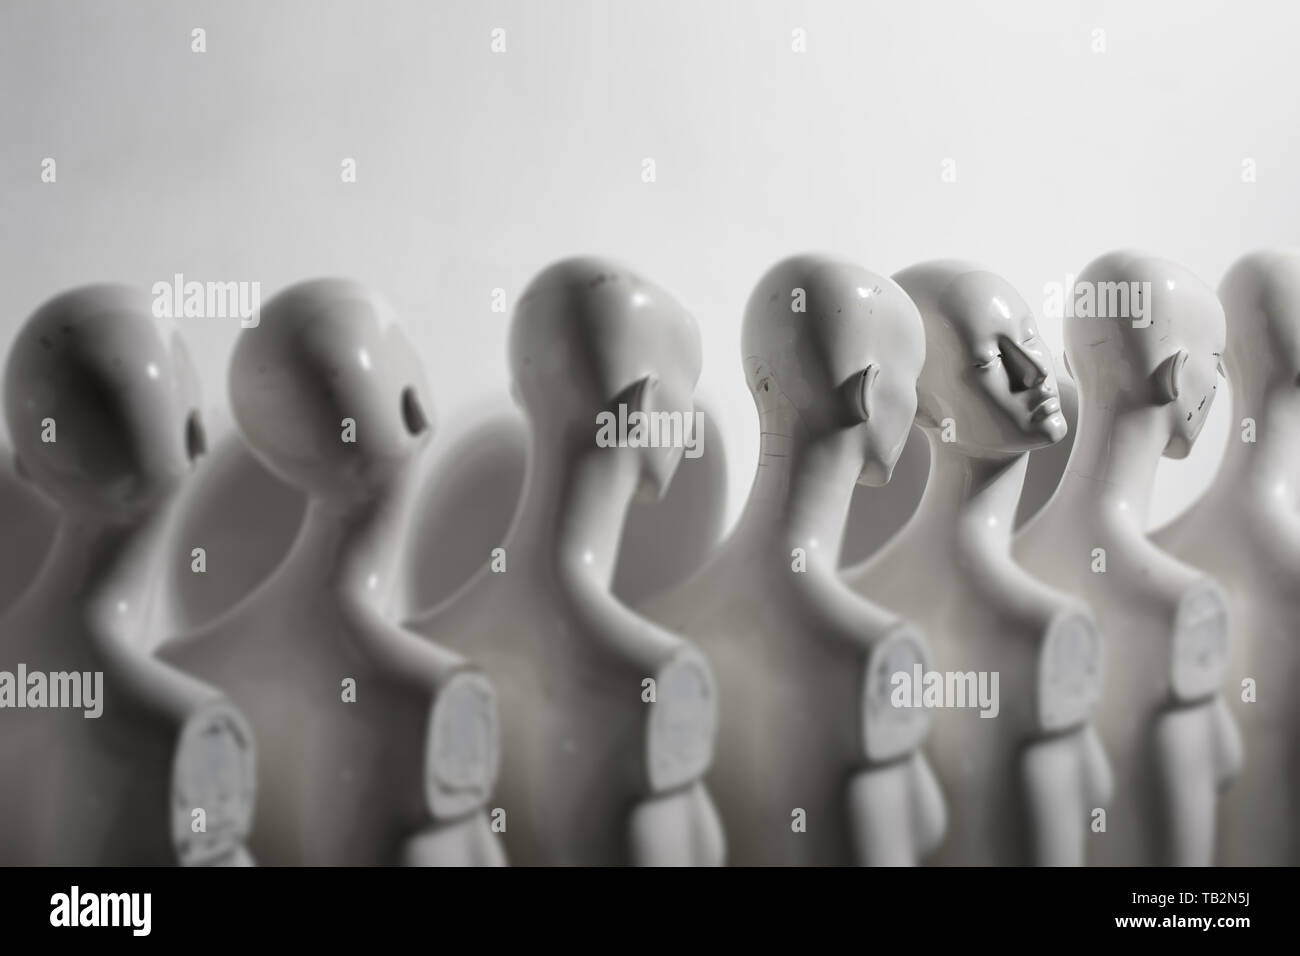 White Woman Torso Figurines Standing in The Line All Looking to Same Direction except of One all shoot on White Bright Background Stock Photo